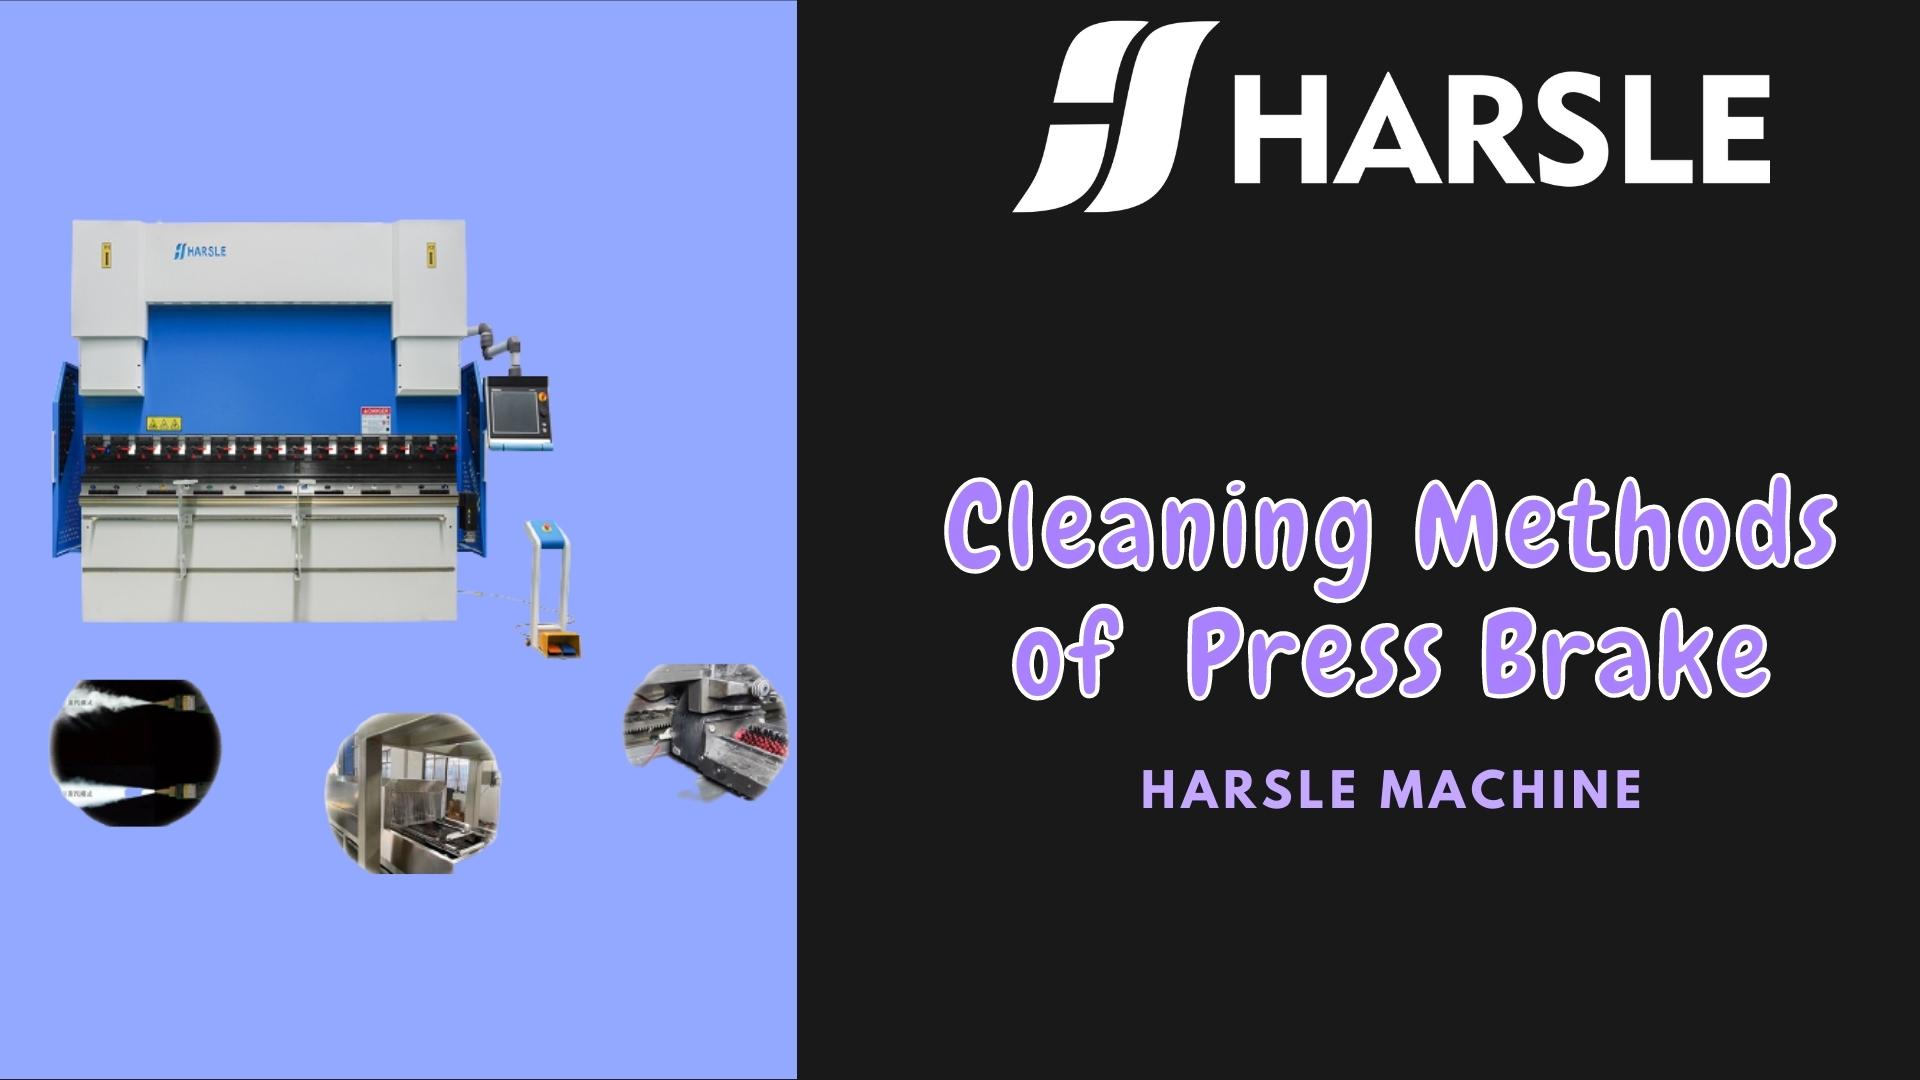 What Is The Hot Press Machine? What Does It Do? - HARSLE